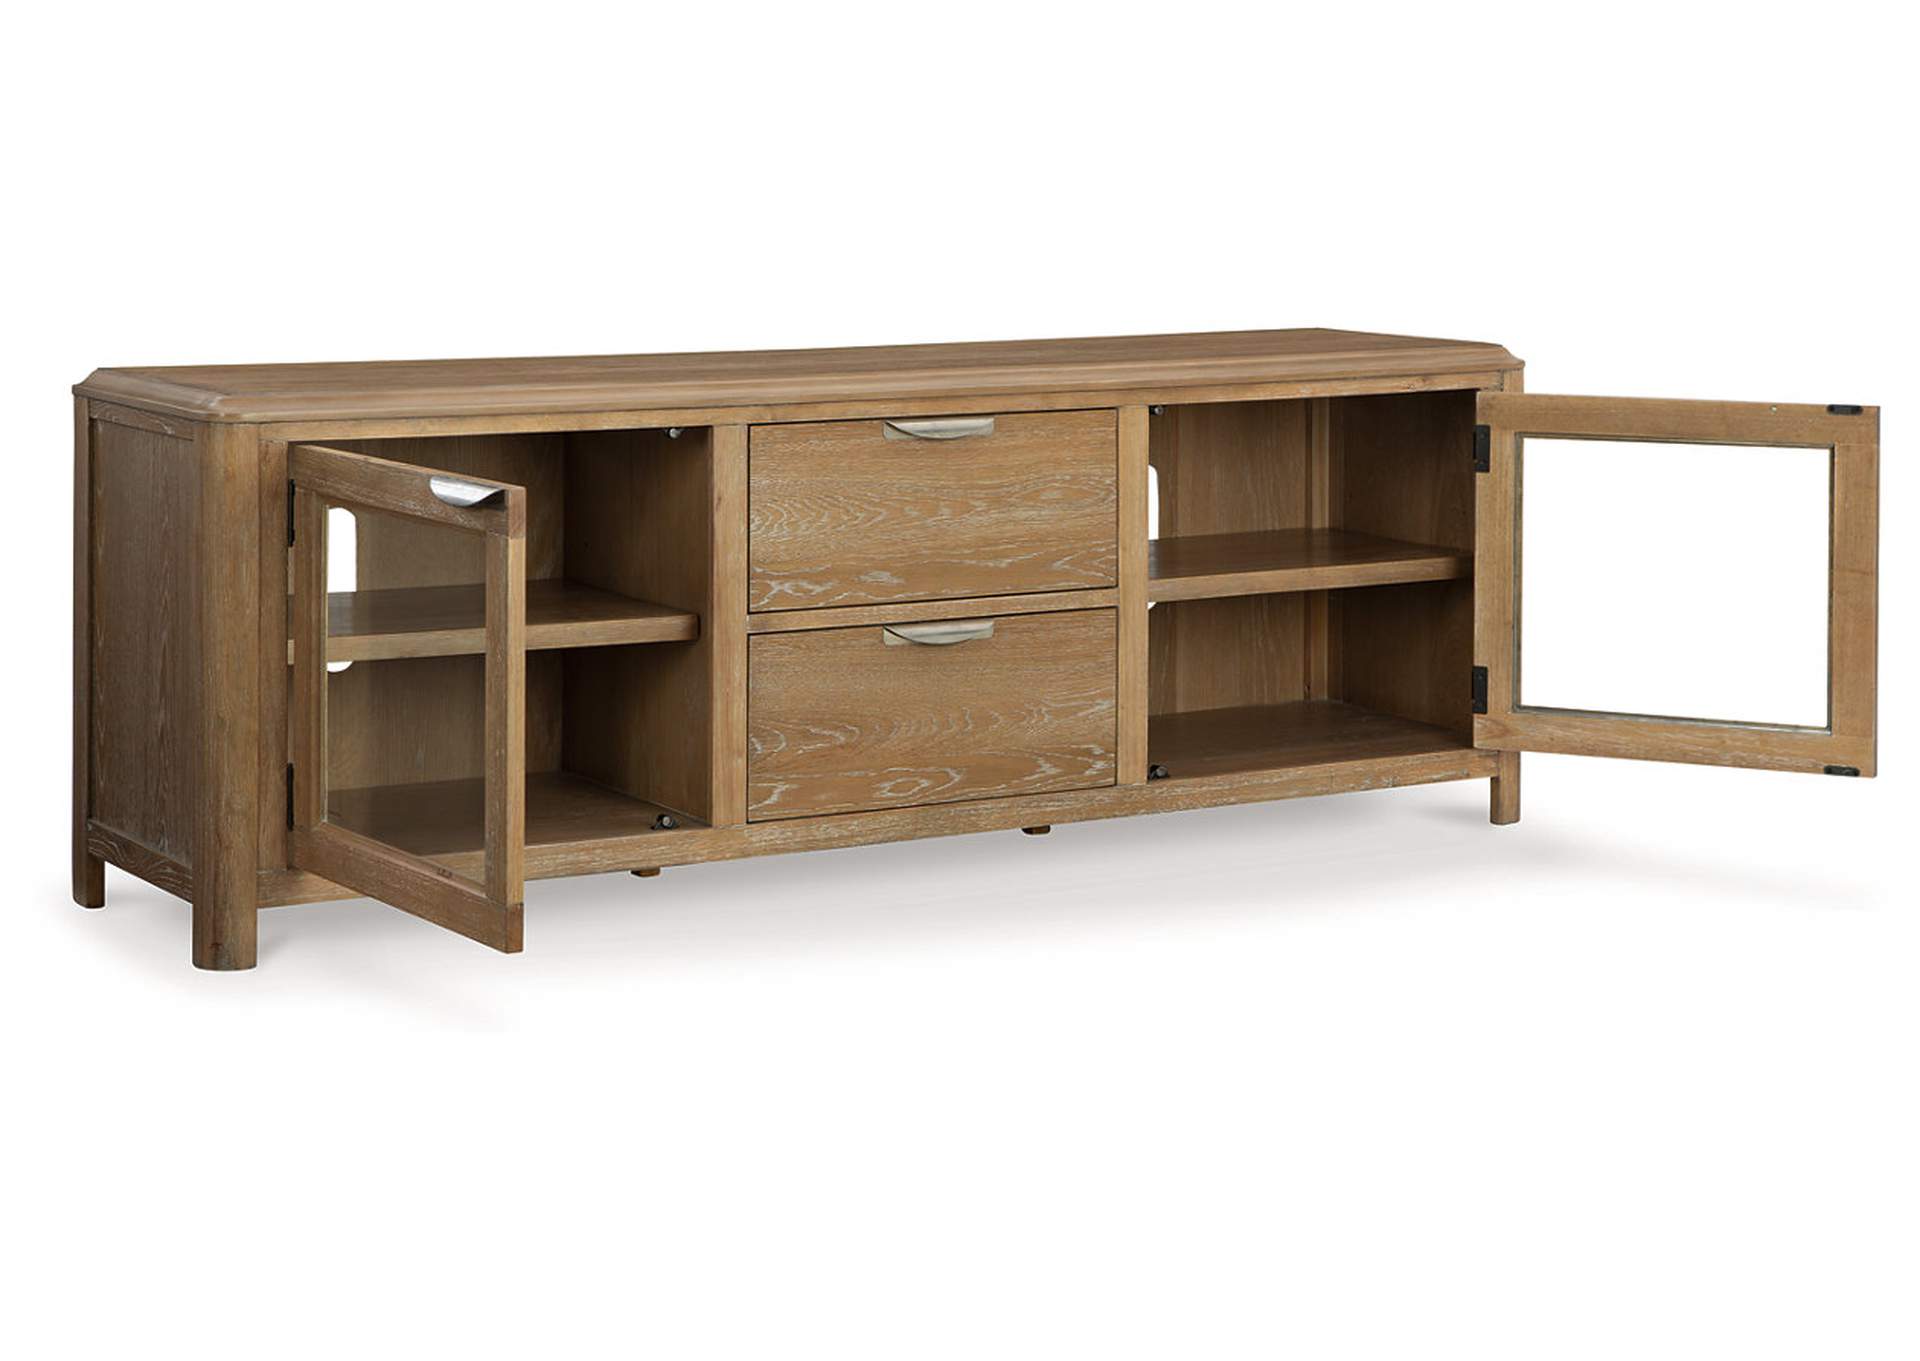 Rencott 80" TV Stand,Signature Design By Ashley